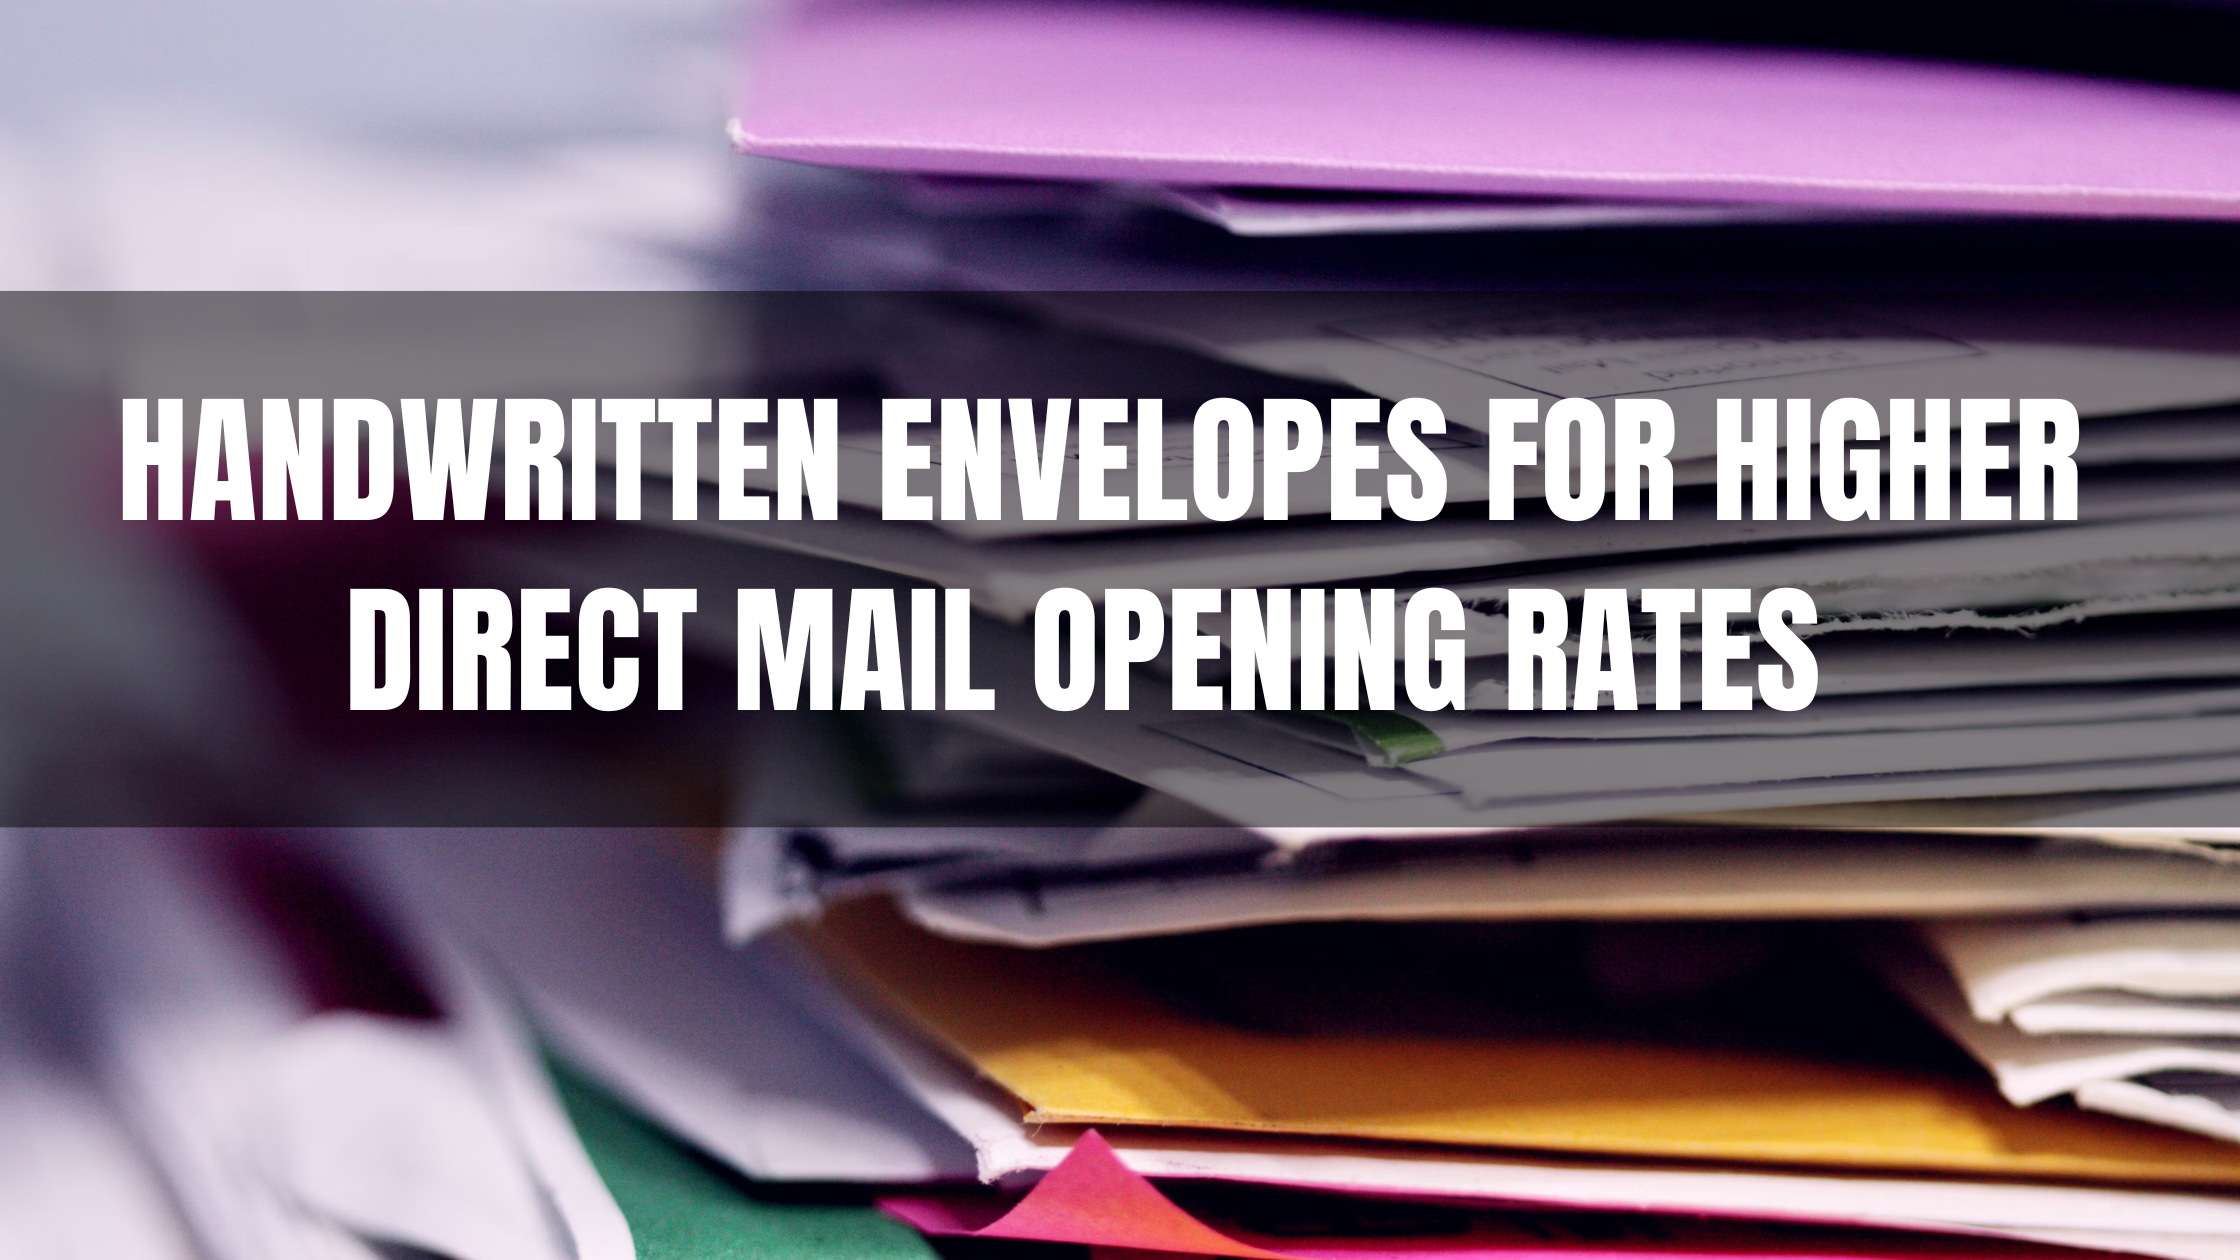 Handwritten Envelopes for Higher Direct Mail Opening Rates